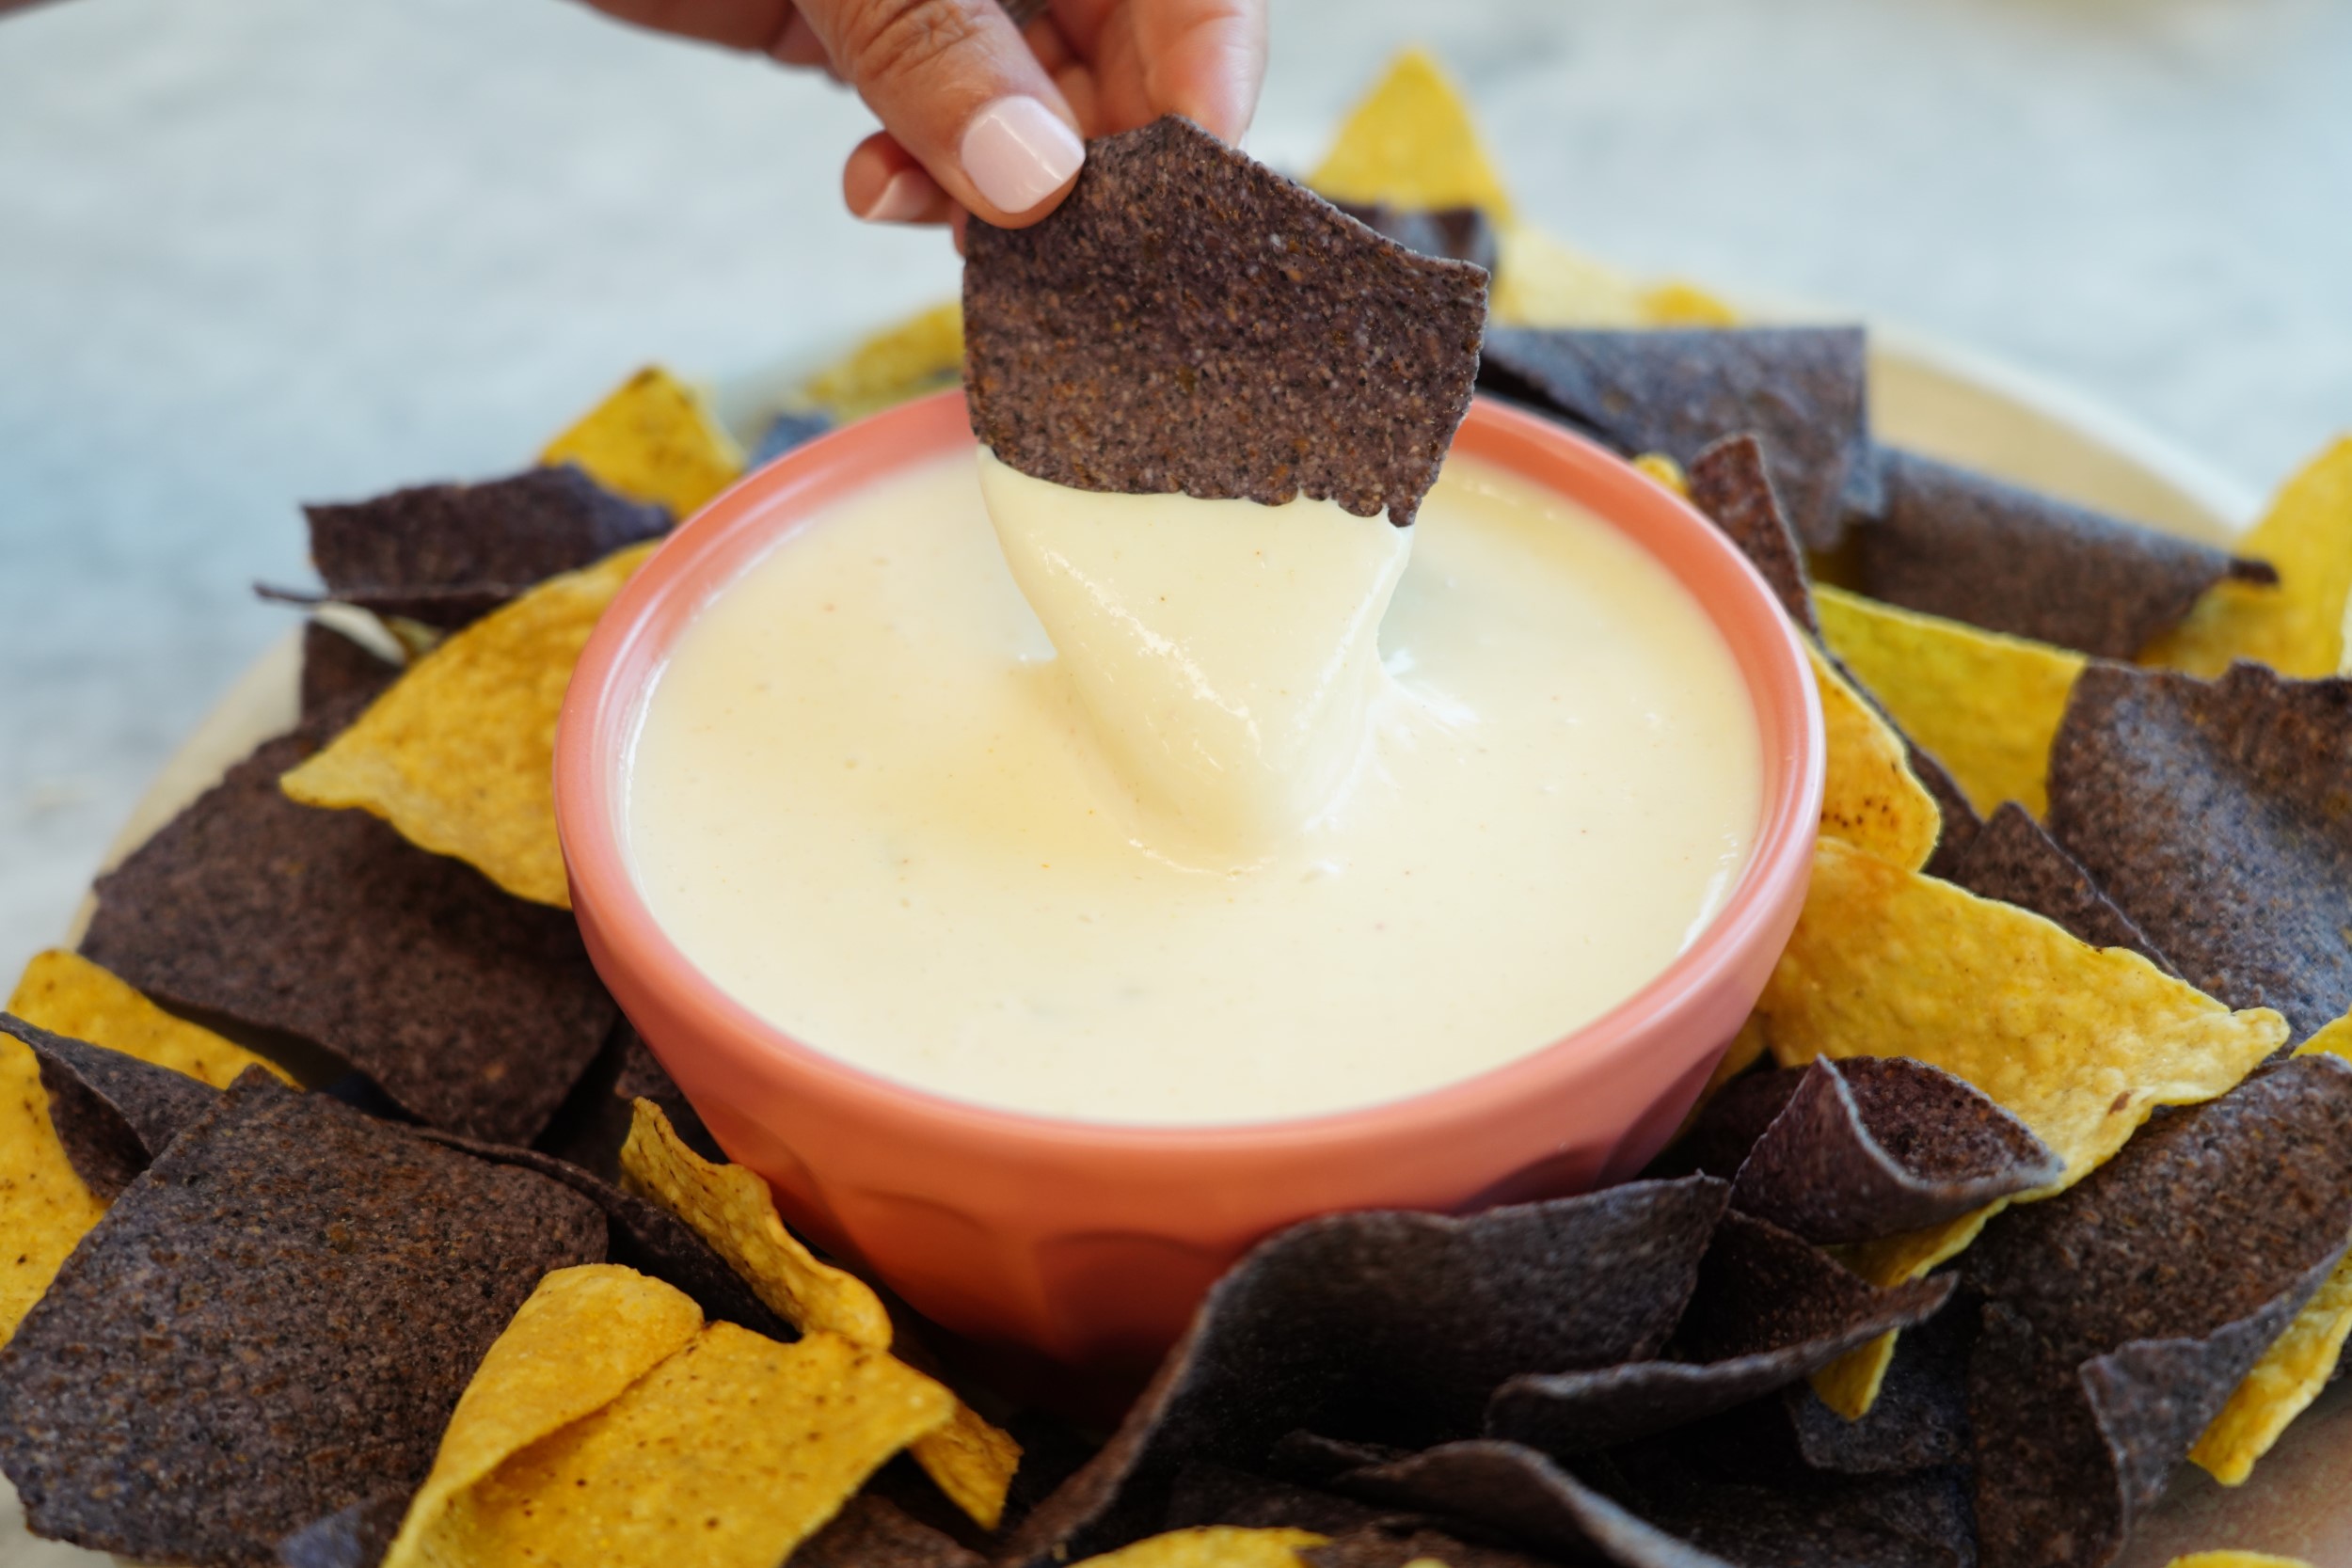 Restaurant-Style White Queso Dip image